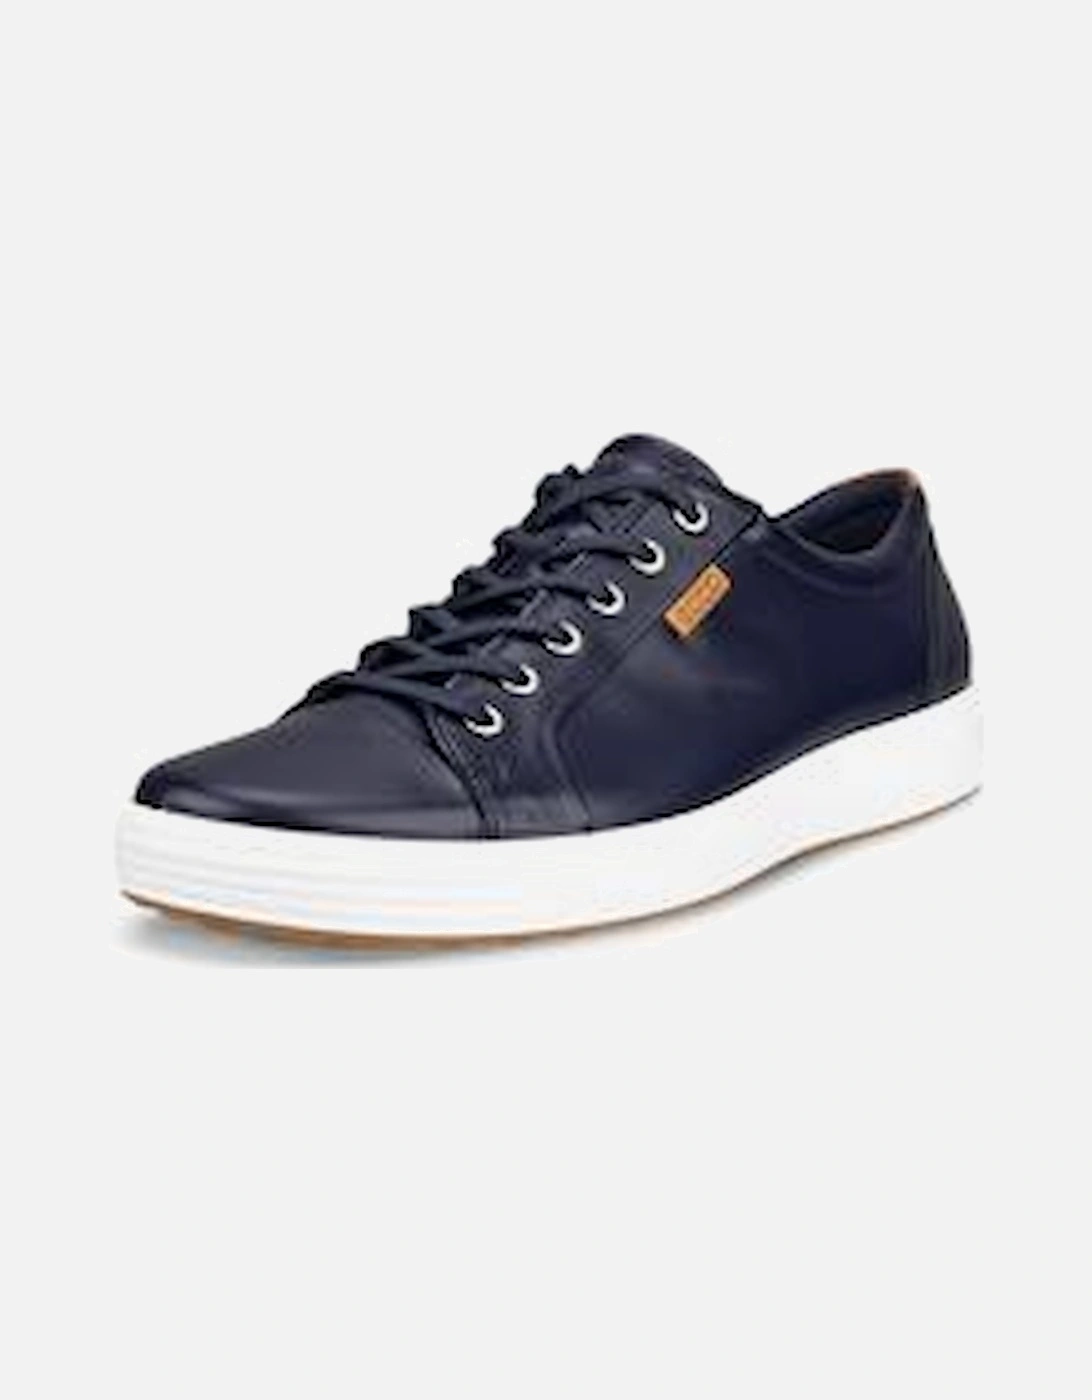 mens sneakers 430004-11303 in navy leather, 5 of 4